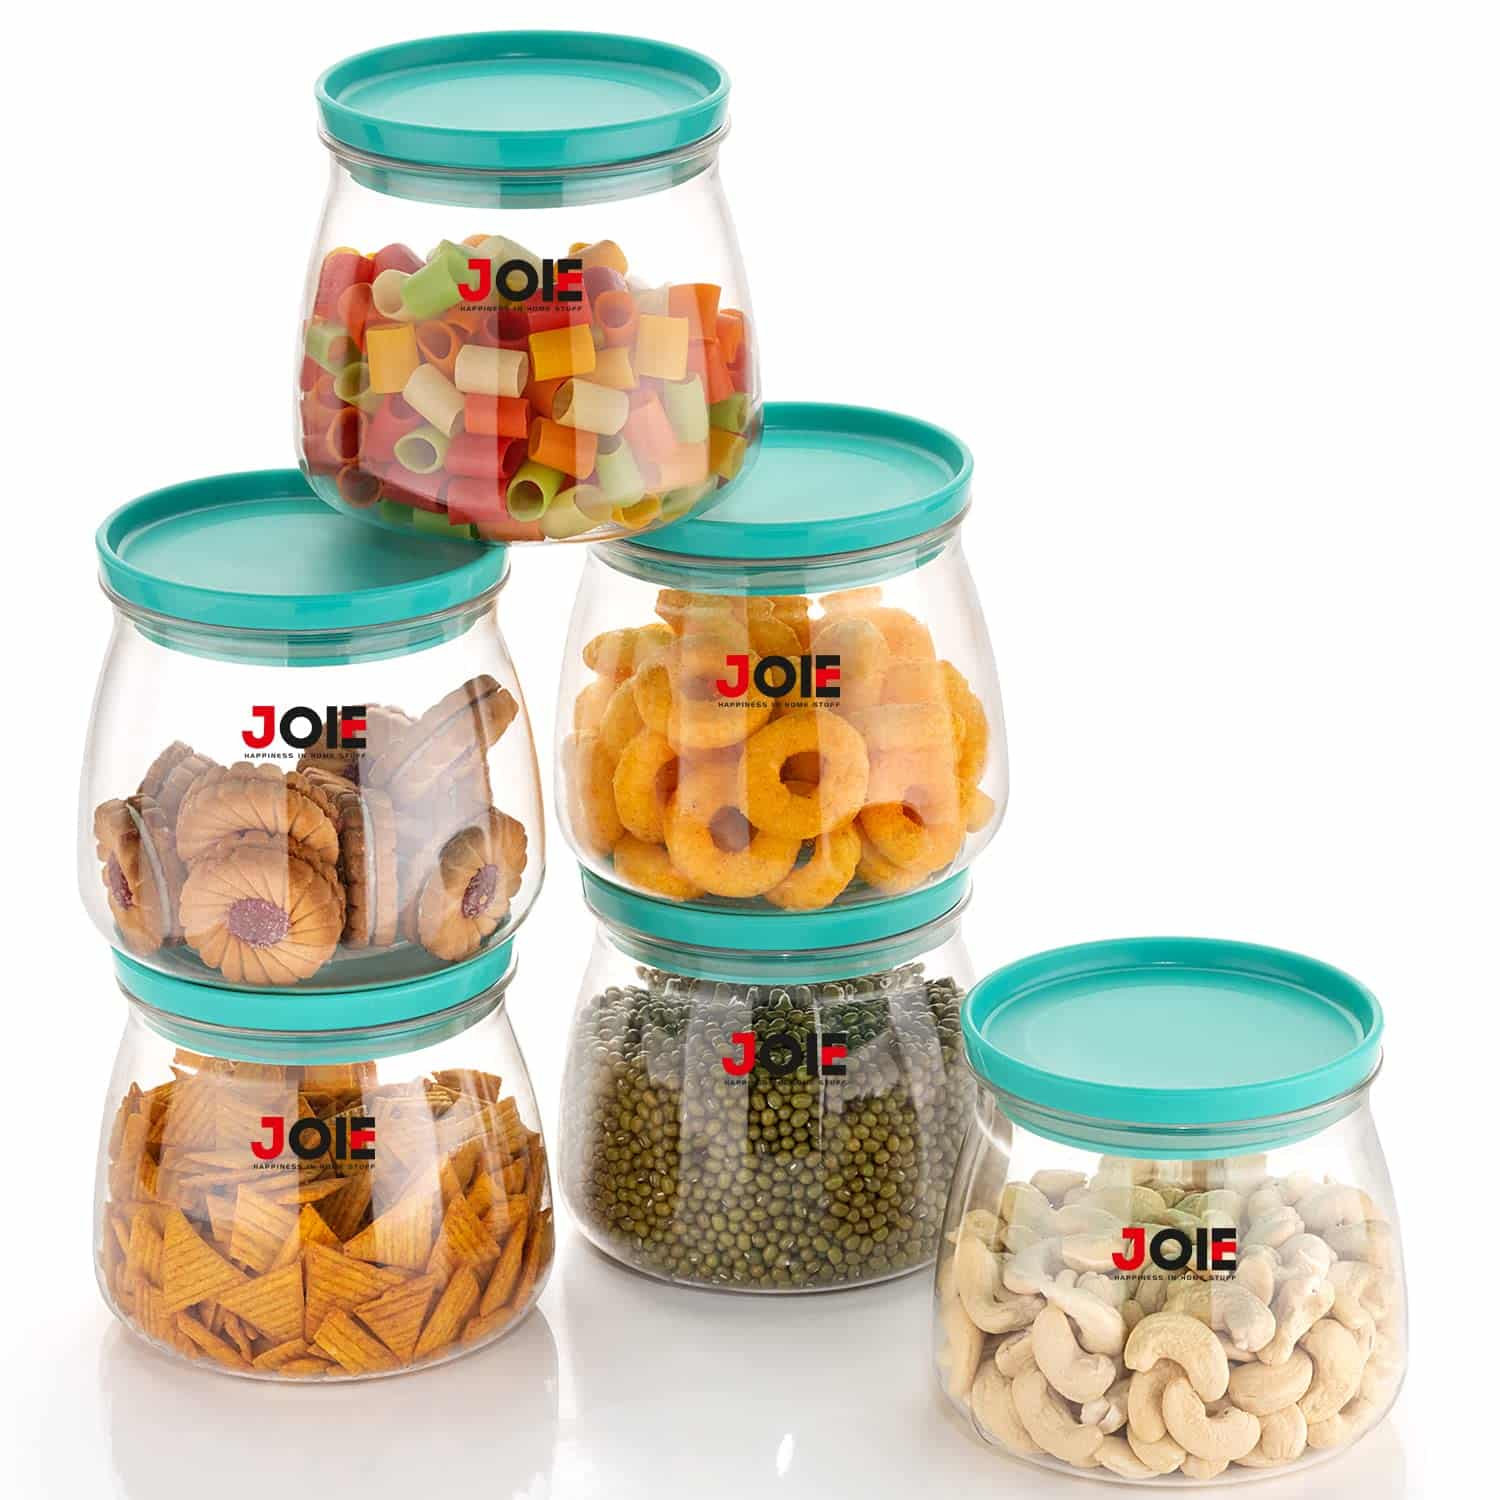 Use airtight container to store your cookies